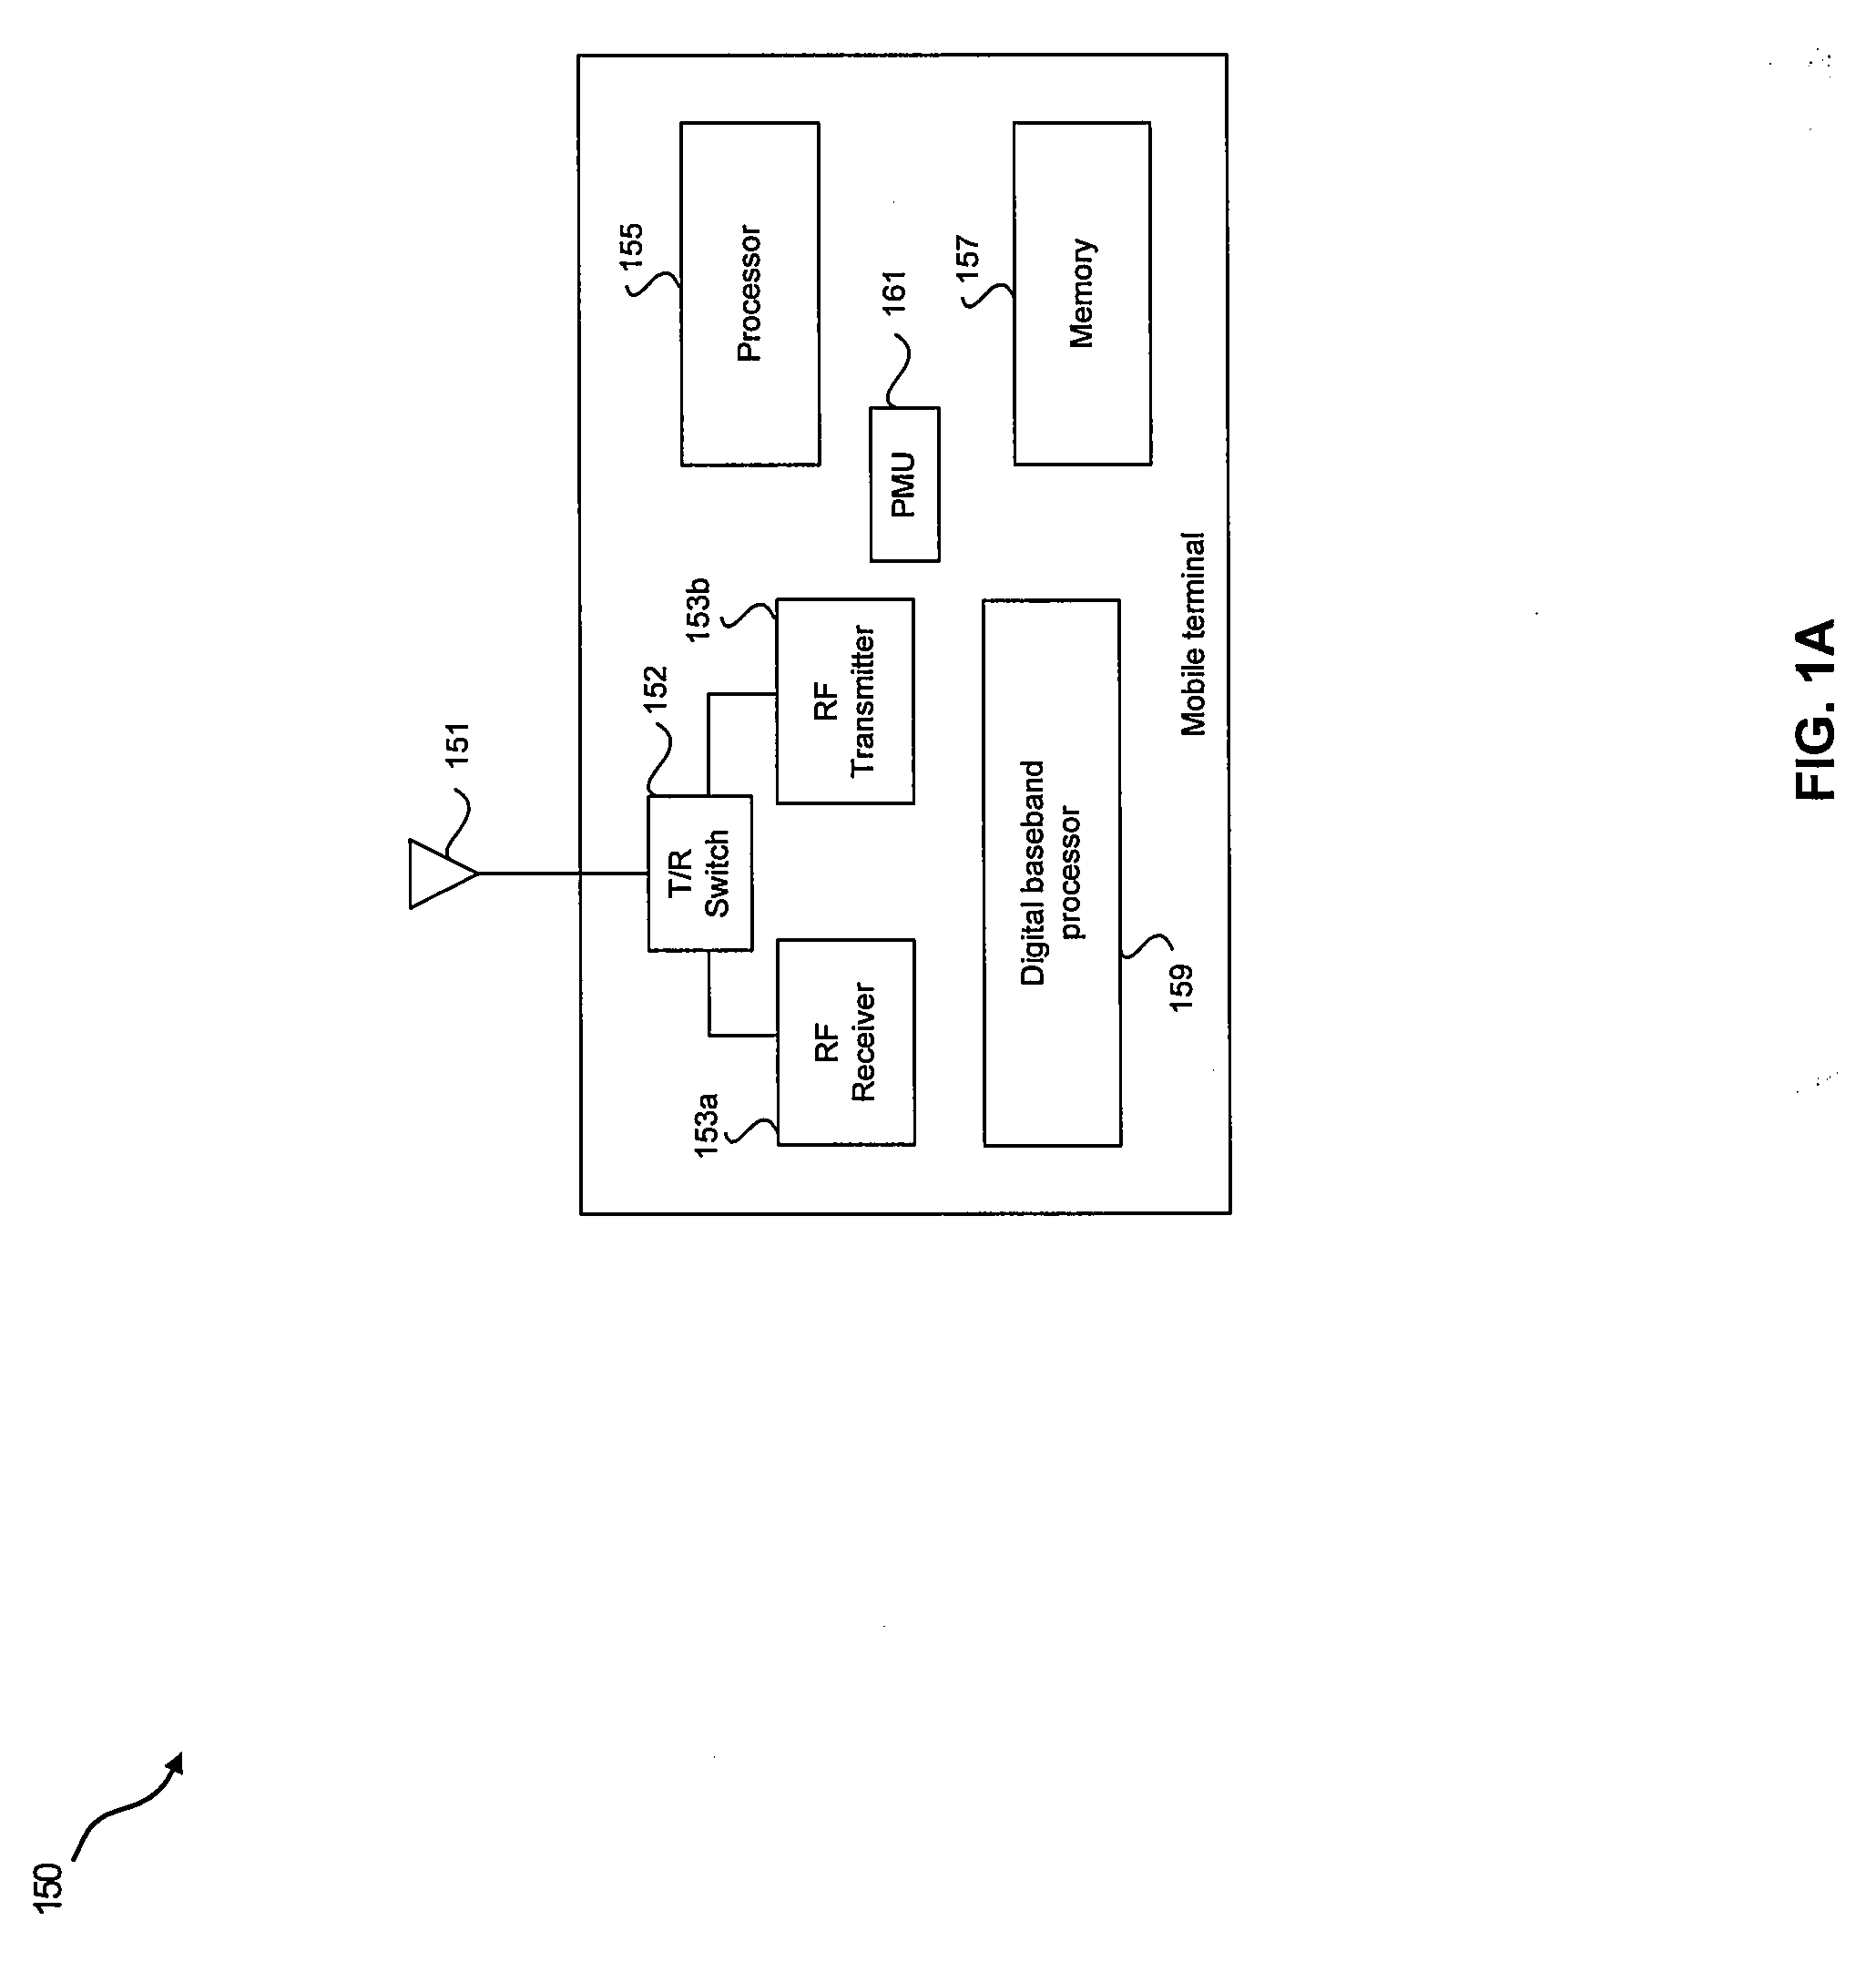 Method and system for level detector calibration for accurate transmit power control